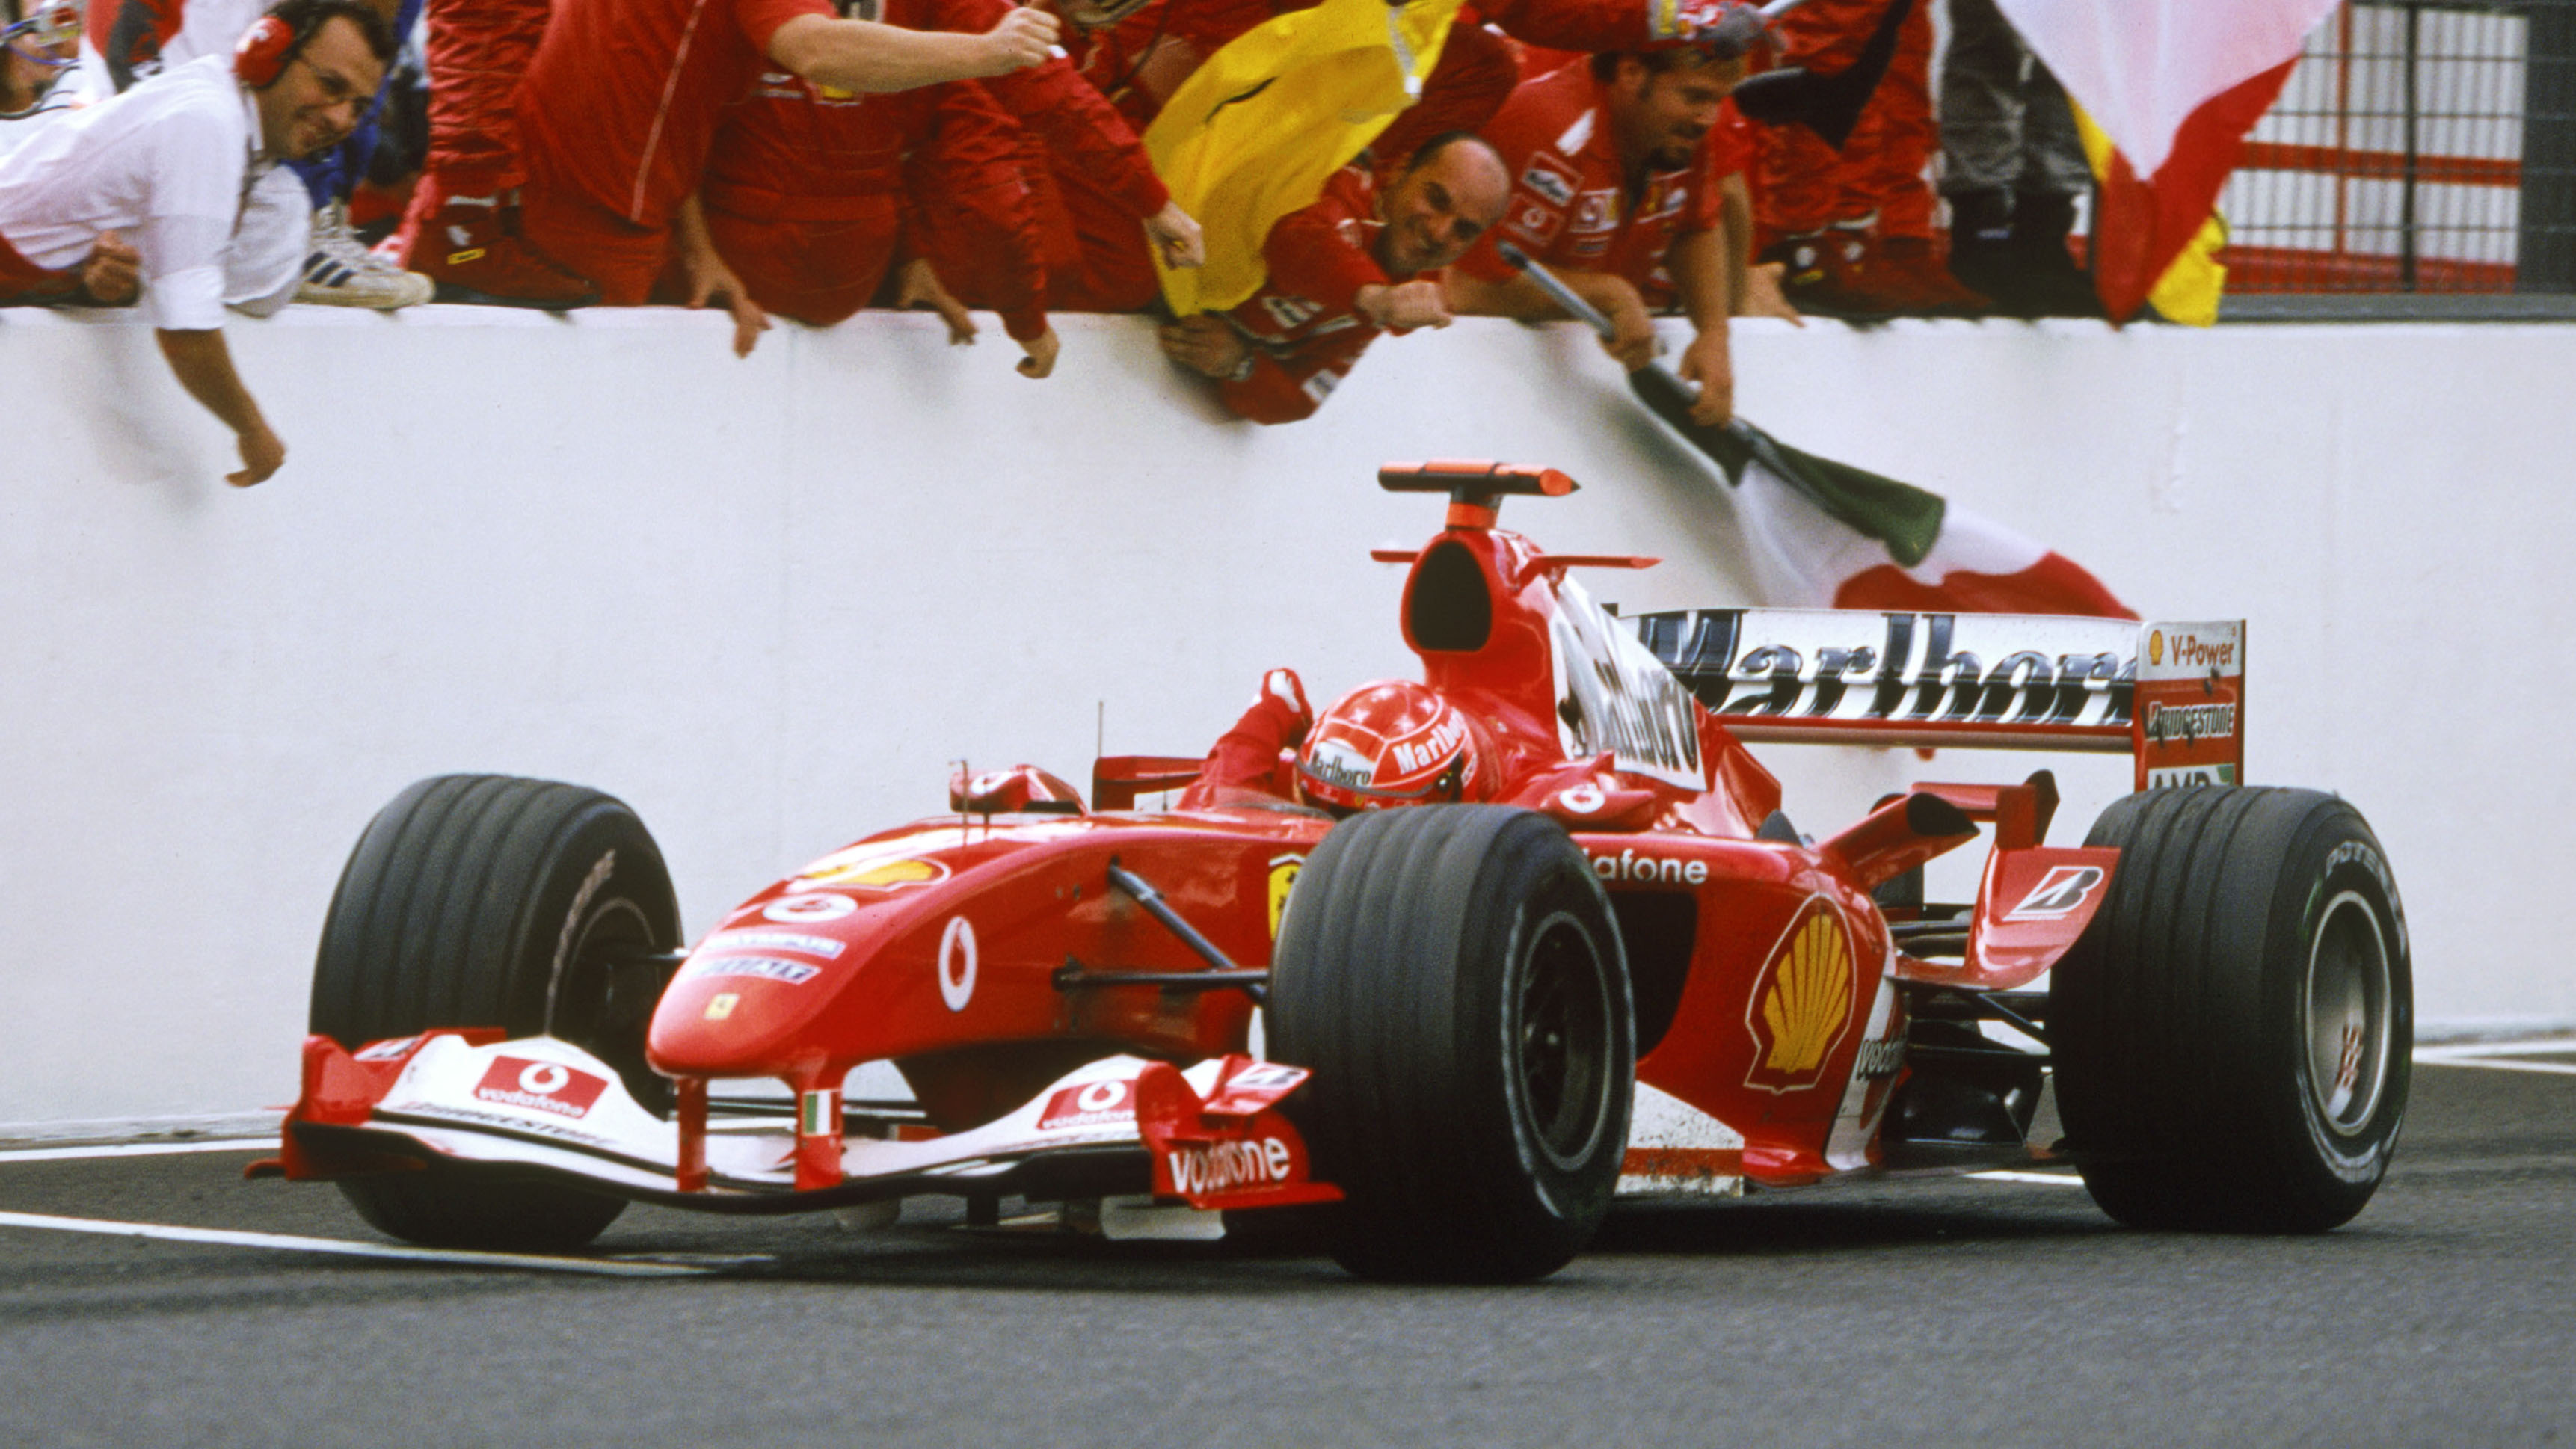 question of the week: which formula one rivalry deserves a movie?